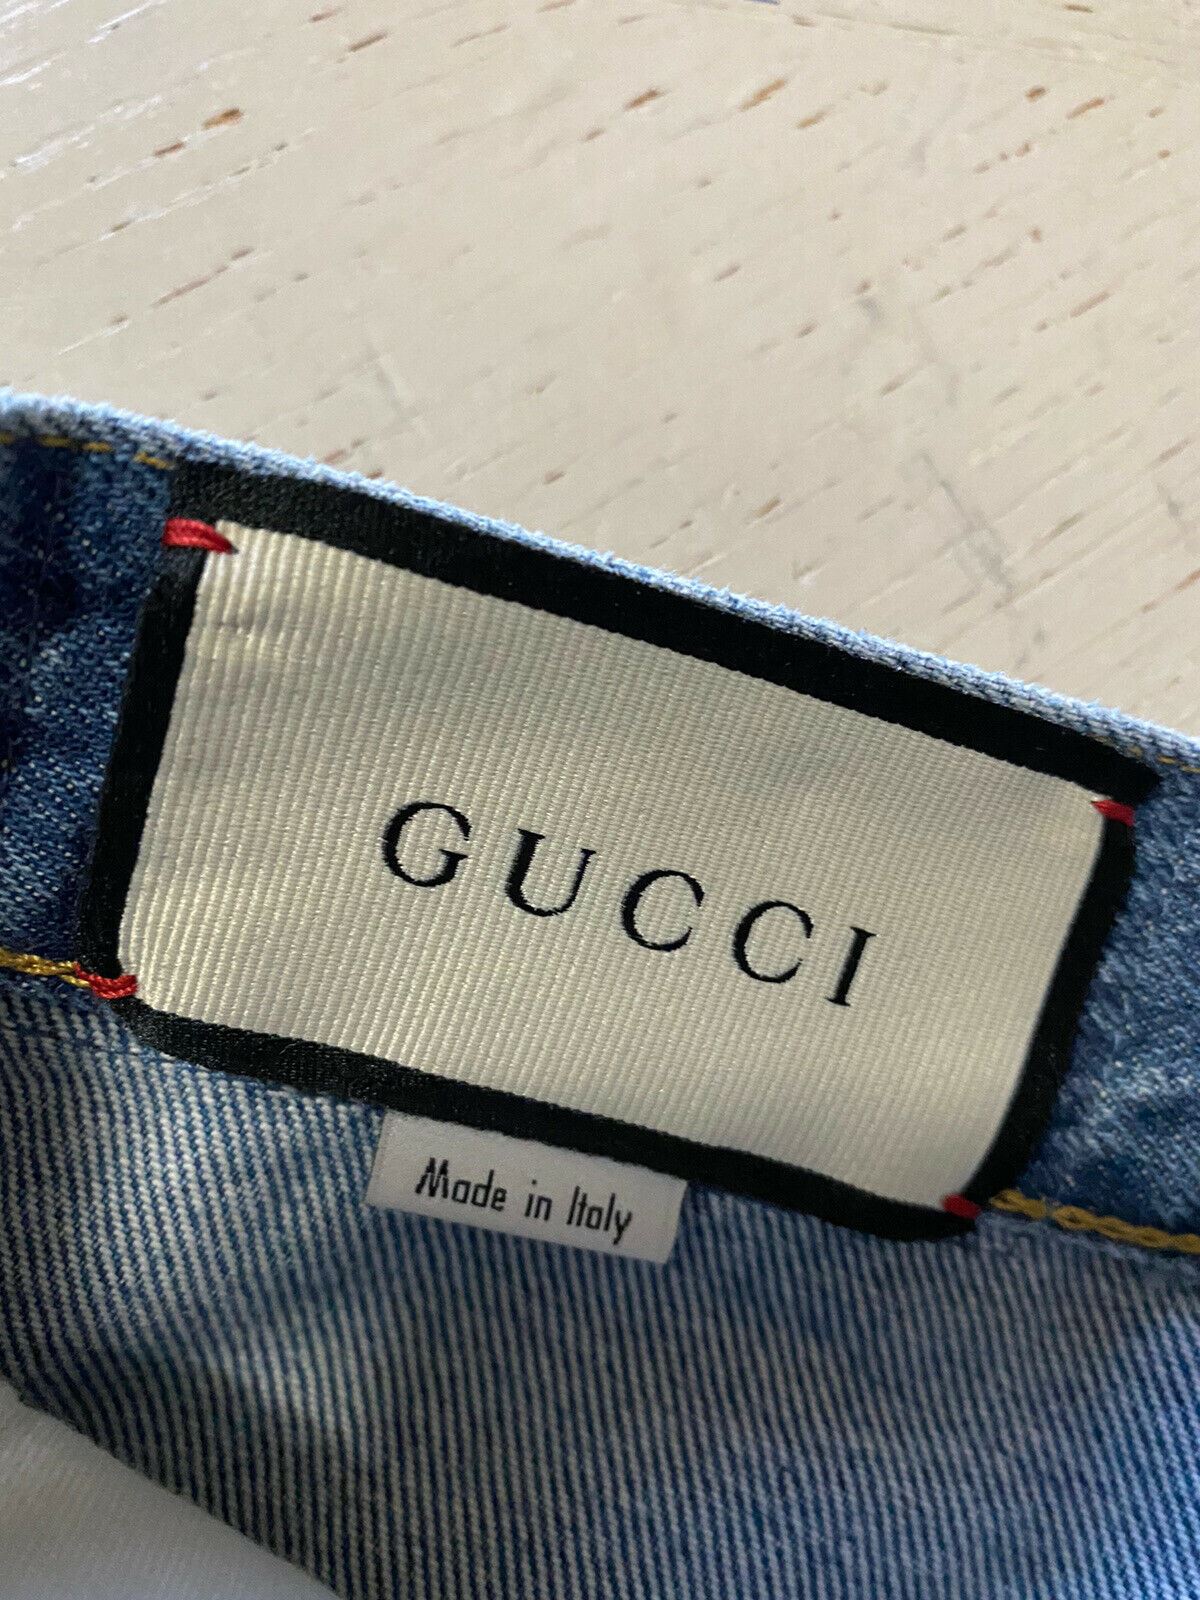 NWT $1500 Gucci Mens Short Jeans Pants Blue Size 36 taly